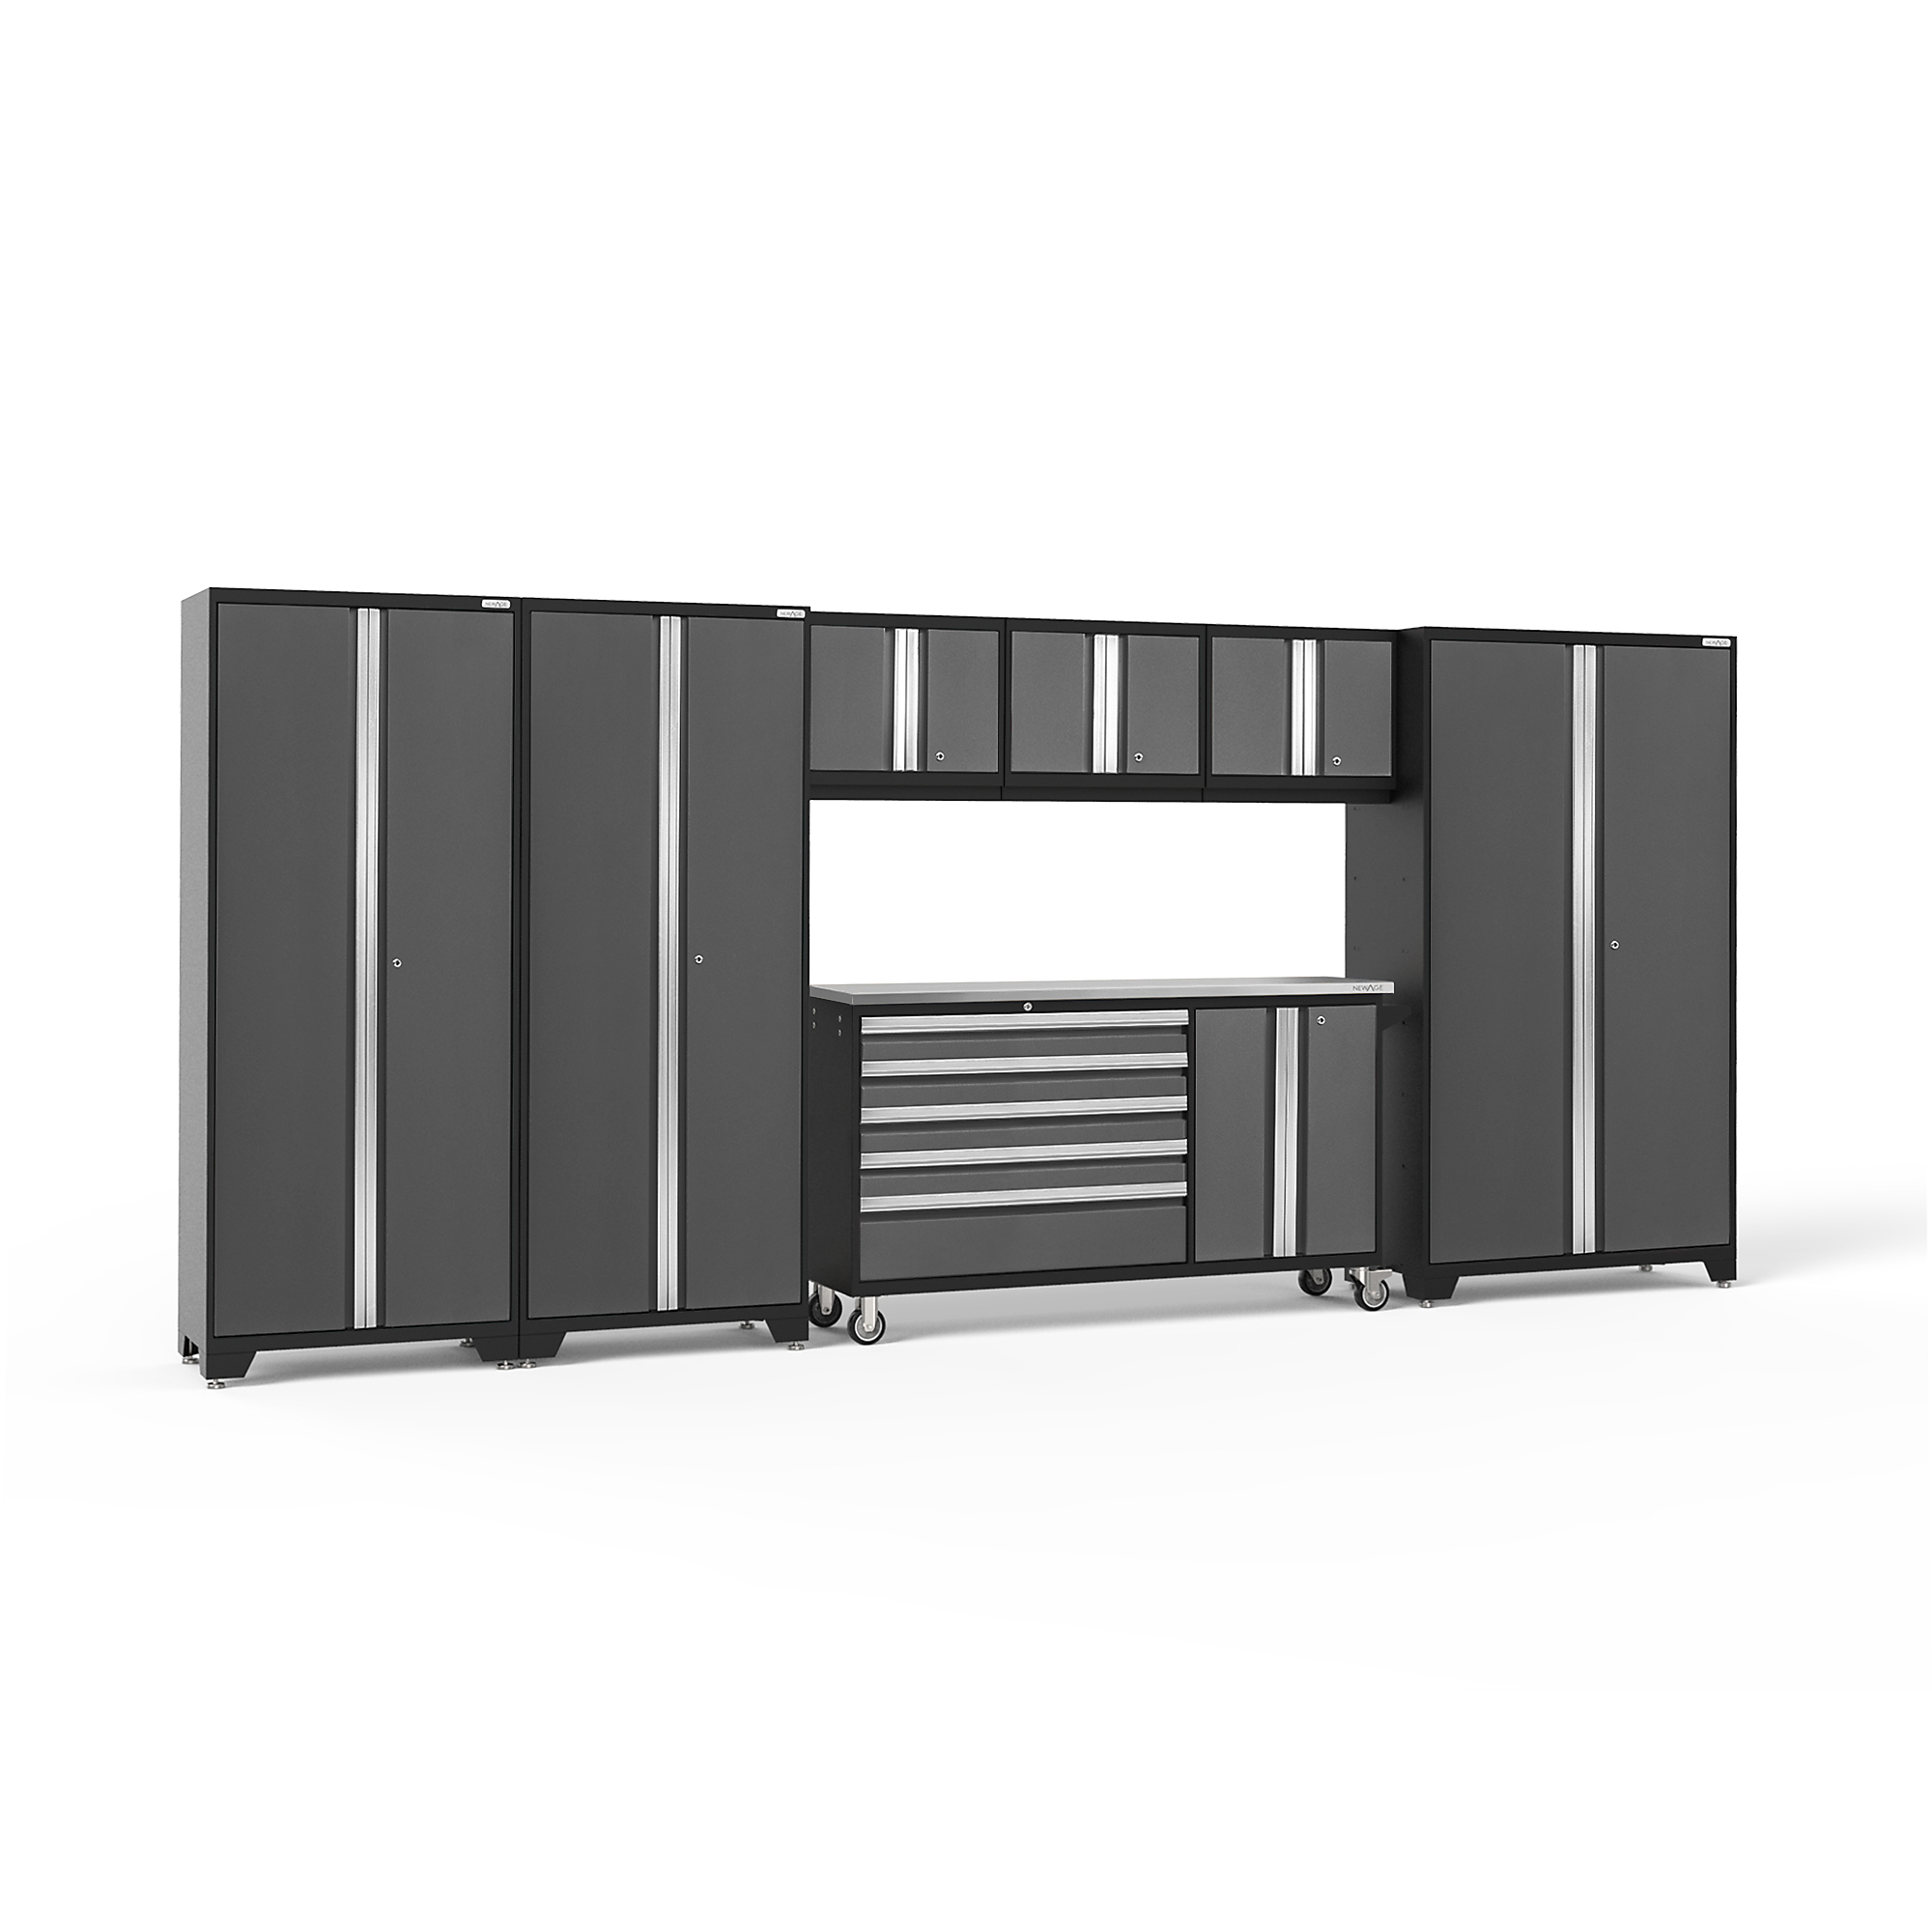 NewAge Products, Bold Series Gray 7-Piece Steel Garage Cabinet Set, Width 174 in, Height 77.25 in, Depth 18 in, Model 50587